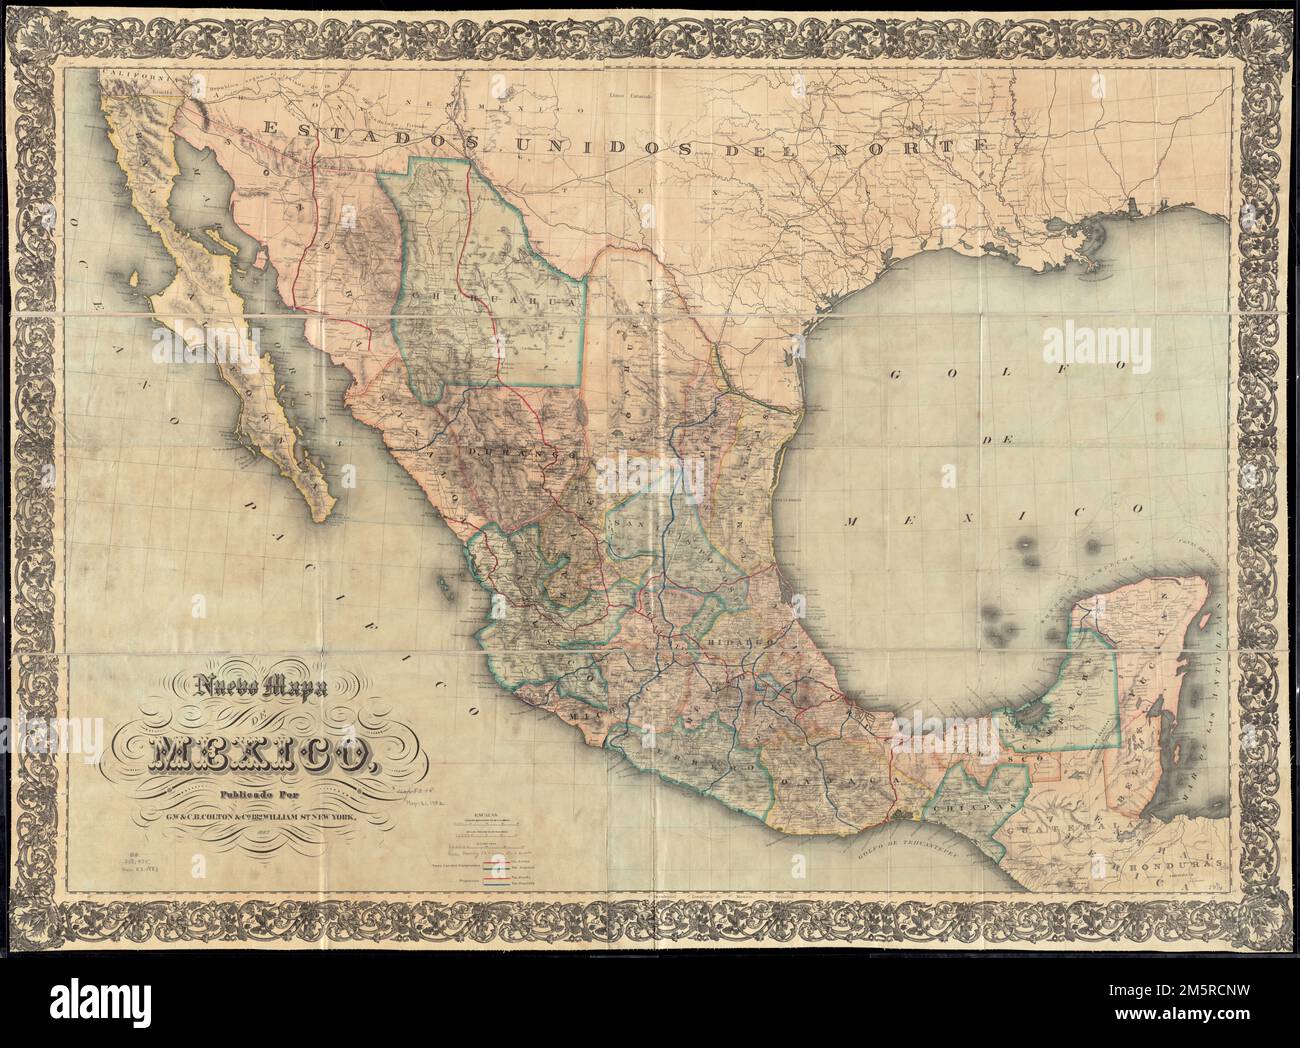 Nuevo mapa de Mexico. Shows roads, railroads, settlements, state boundaries, drainage, etc. Relief shown by hachures. Depths shown by isolines. Prime meridian: Mexico.... , Mexico Stock Photo